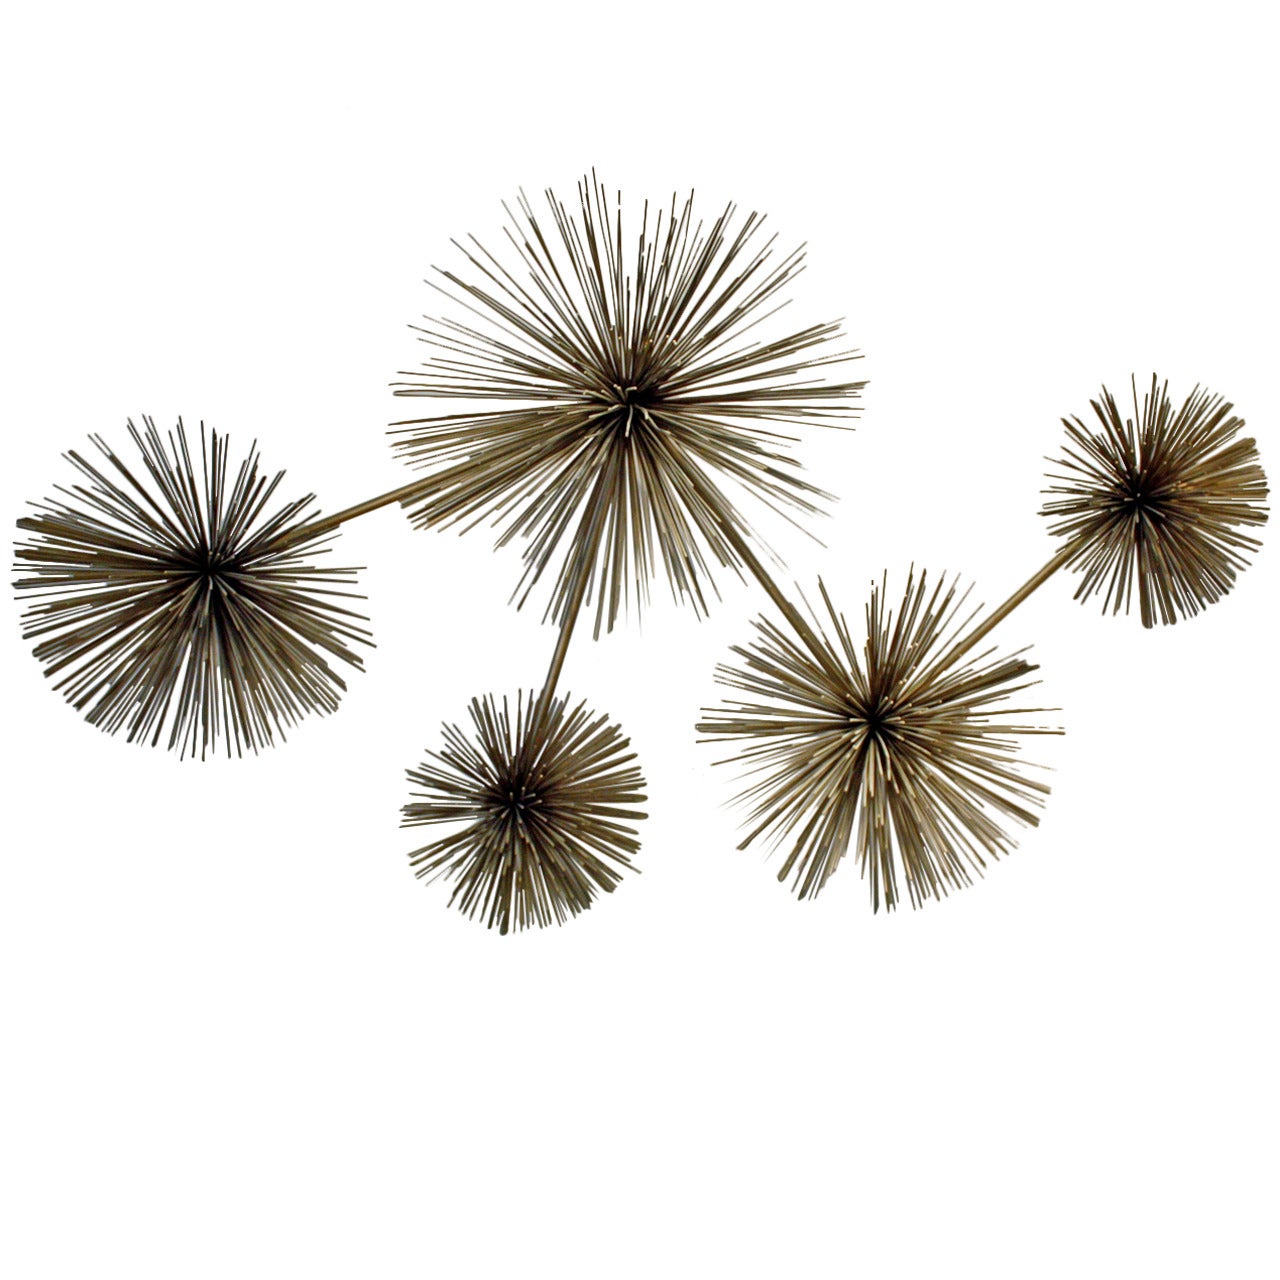 Curtis Jere "Pom Pom" or "Sea Urchin" Wall Sculpture